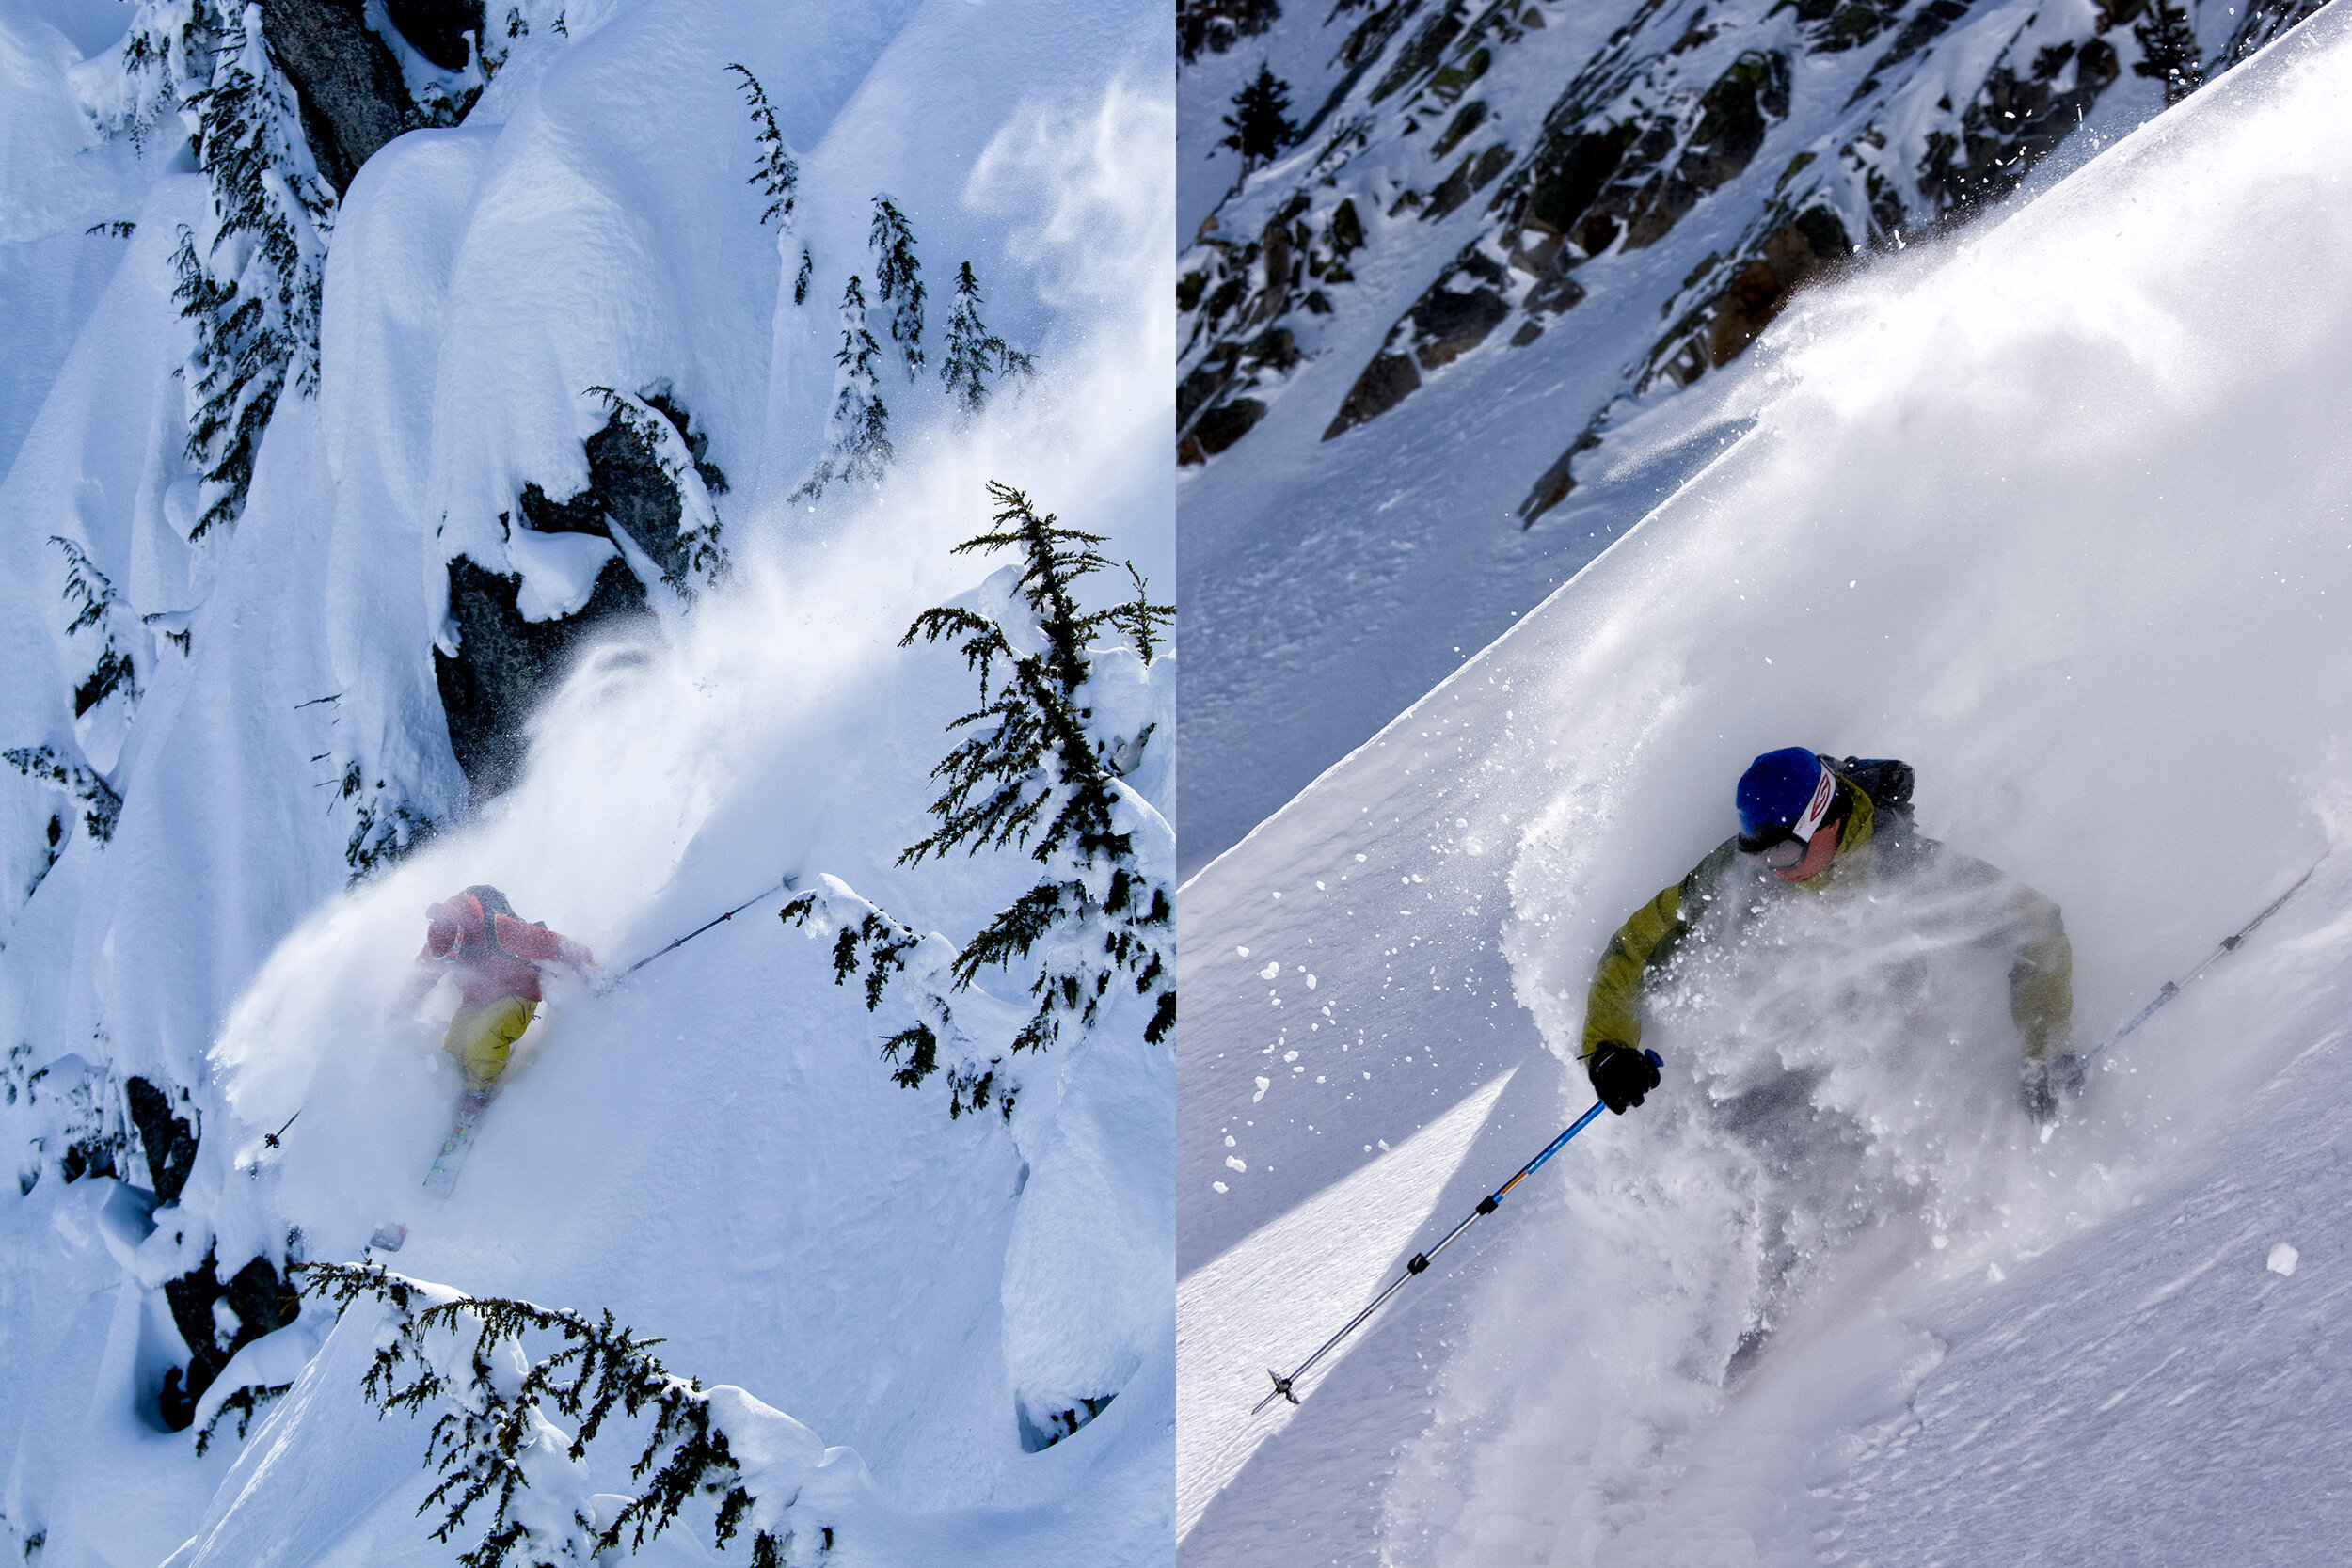  Adventure: Left: Karter Riach skiing in the Stevens Pass backcountry, Central Cascades; Right: Will Sumner skiing in the Wasatch backcountry, Wolverine Cirque, Utah 